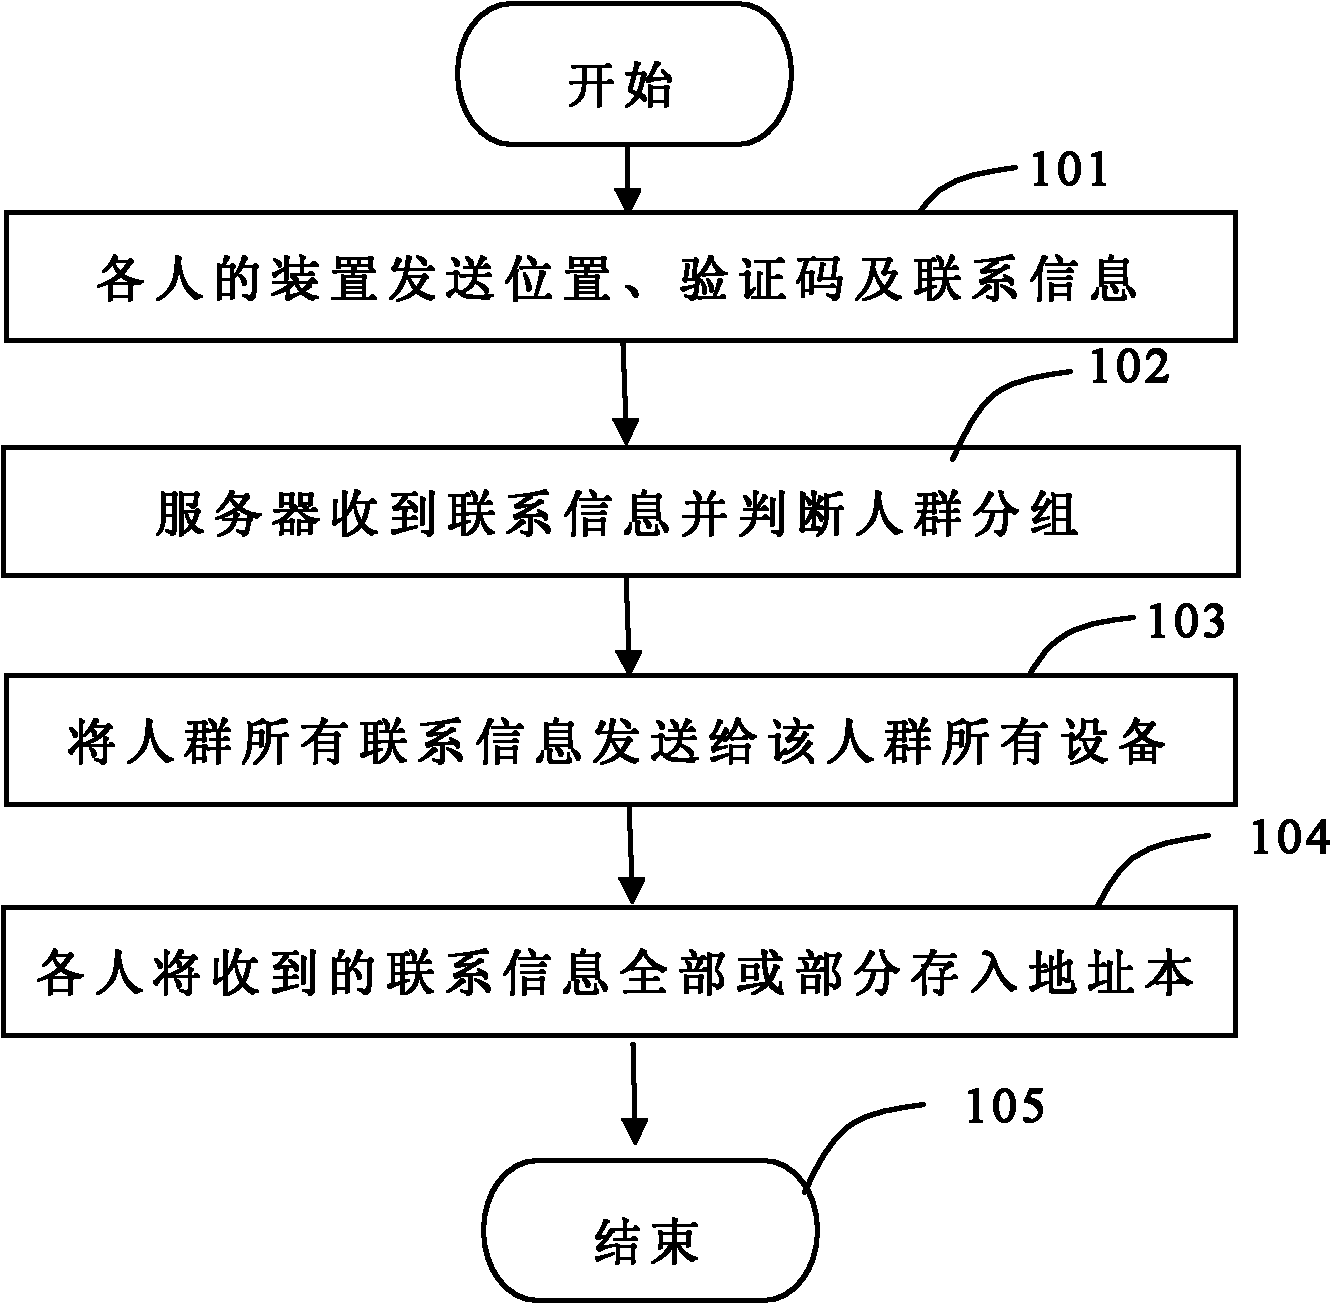 Method for creating contact group based on geographical location information